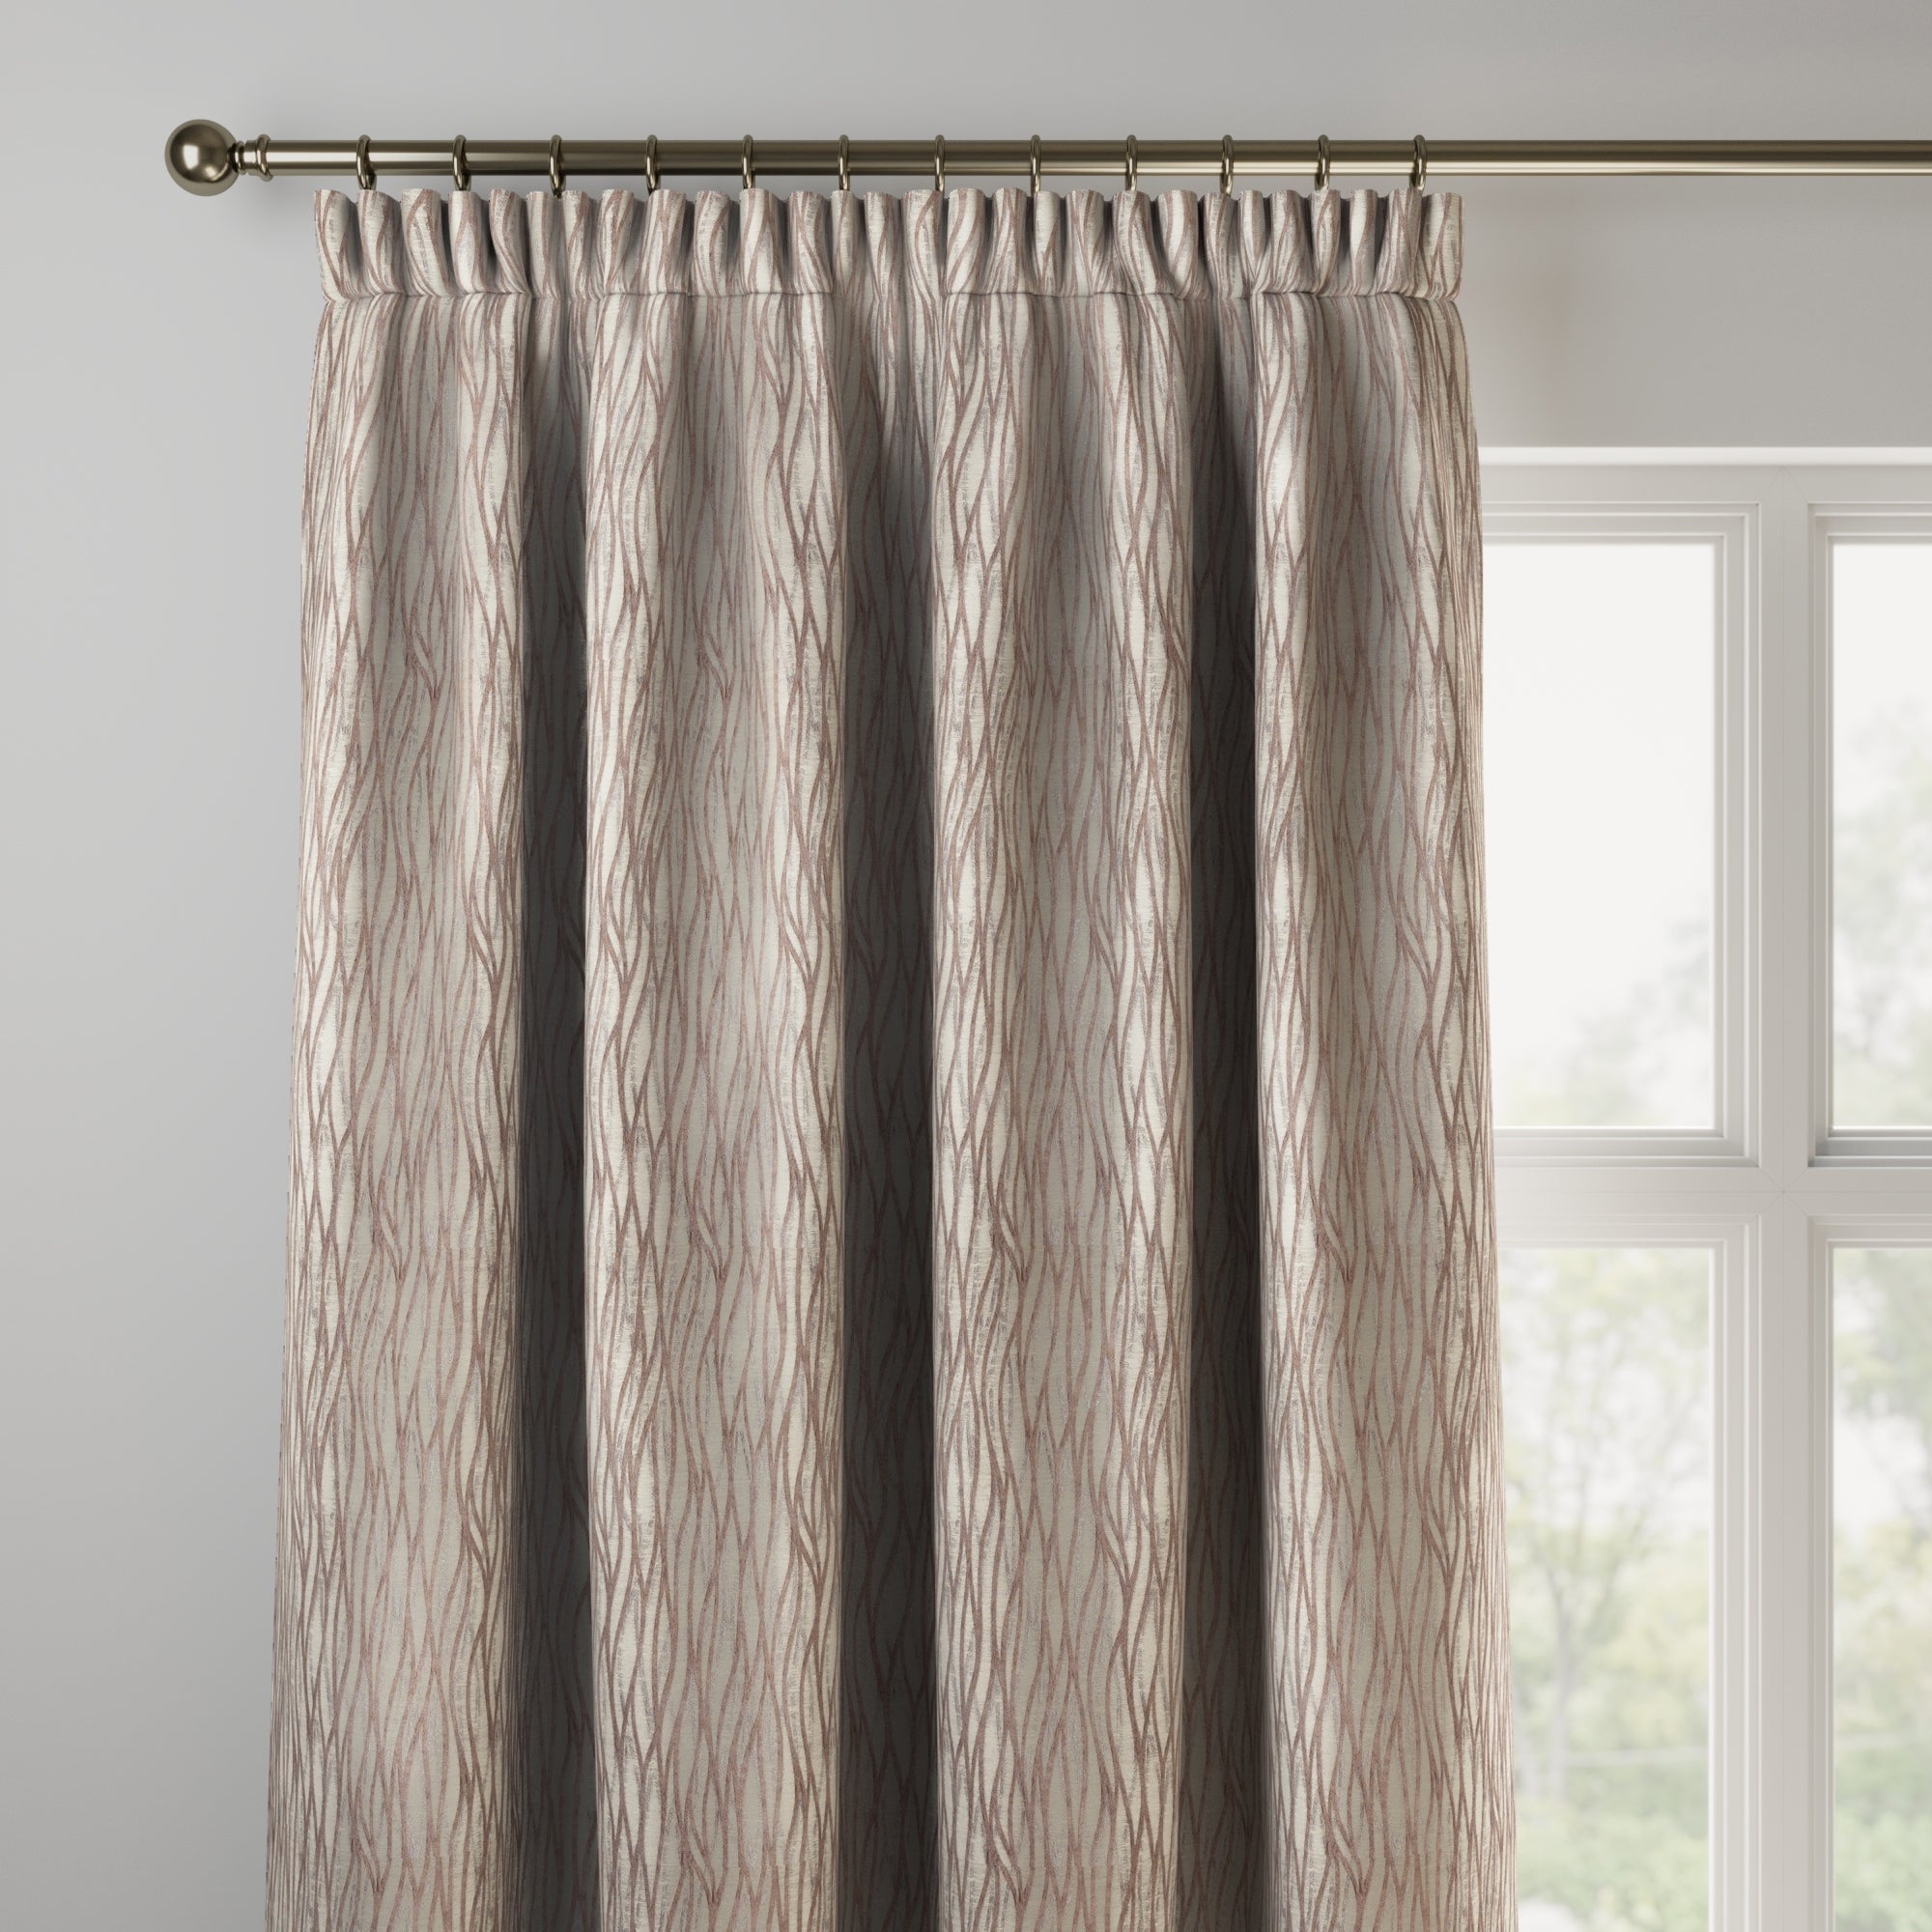 Linear Made to Measure Curtains | Dunelm